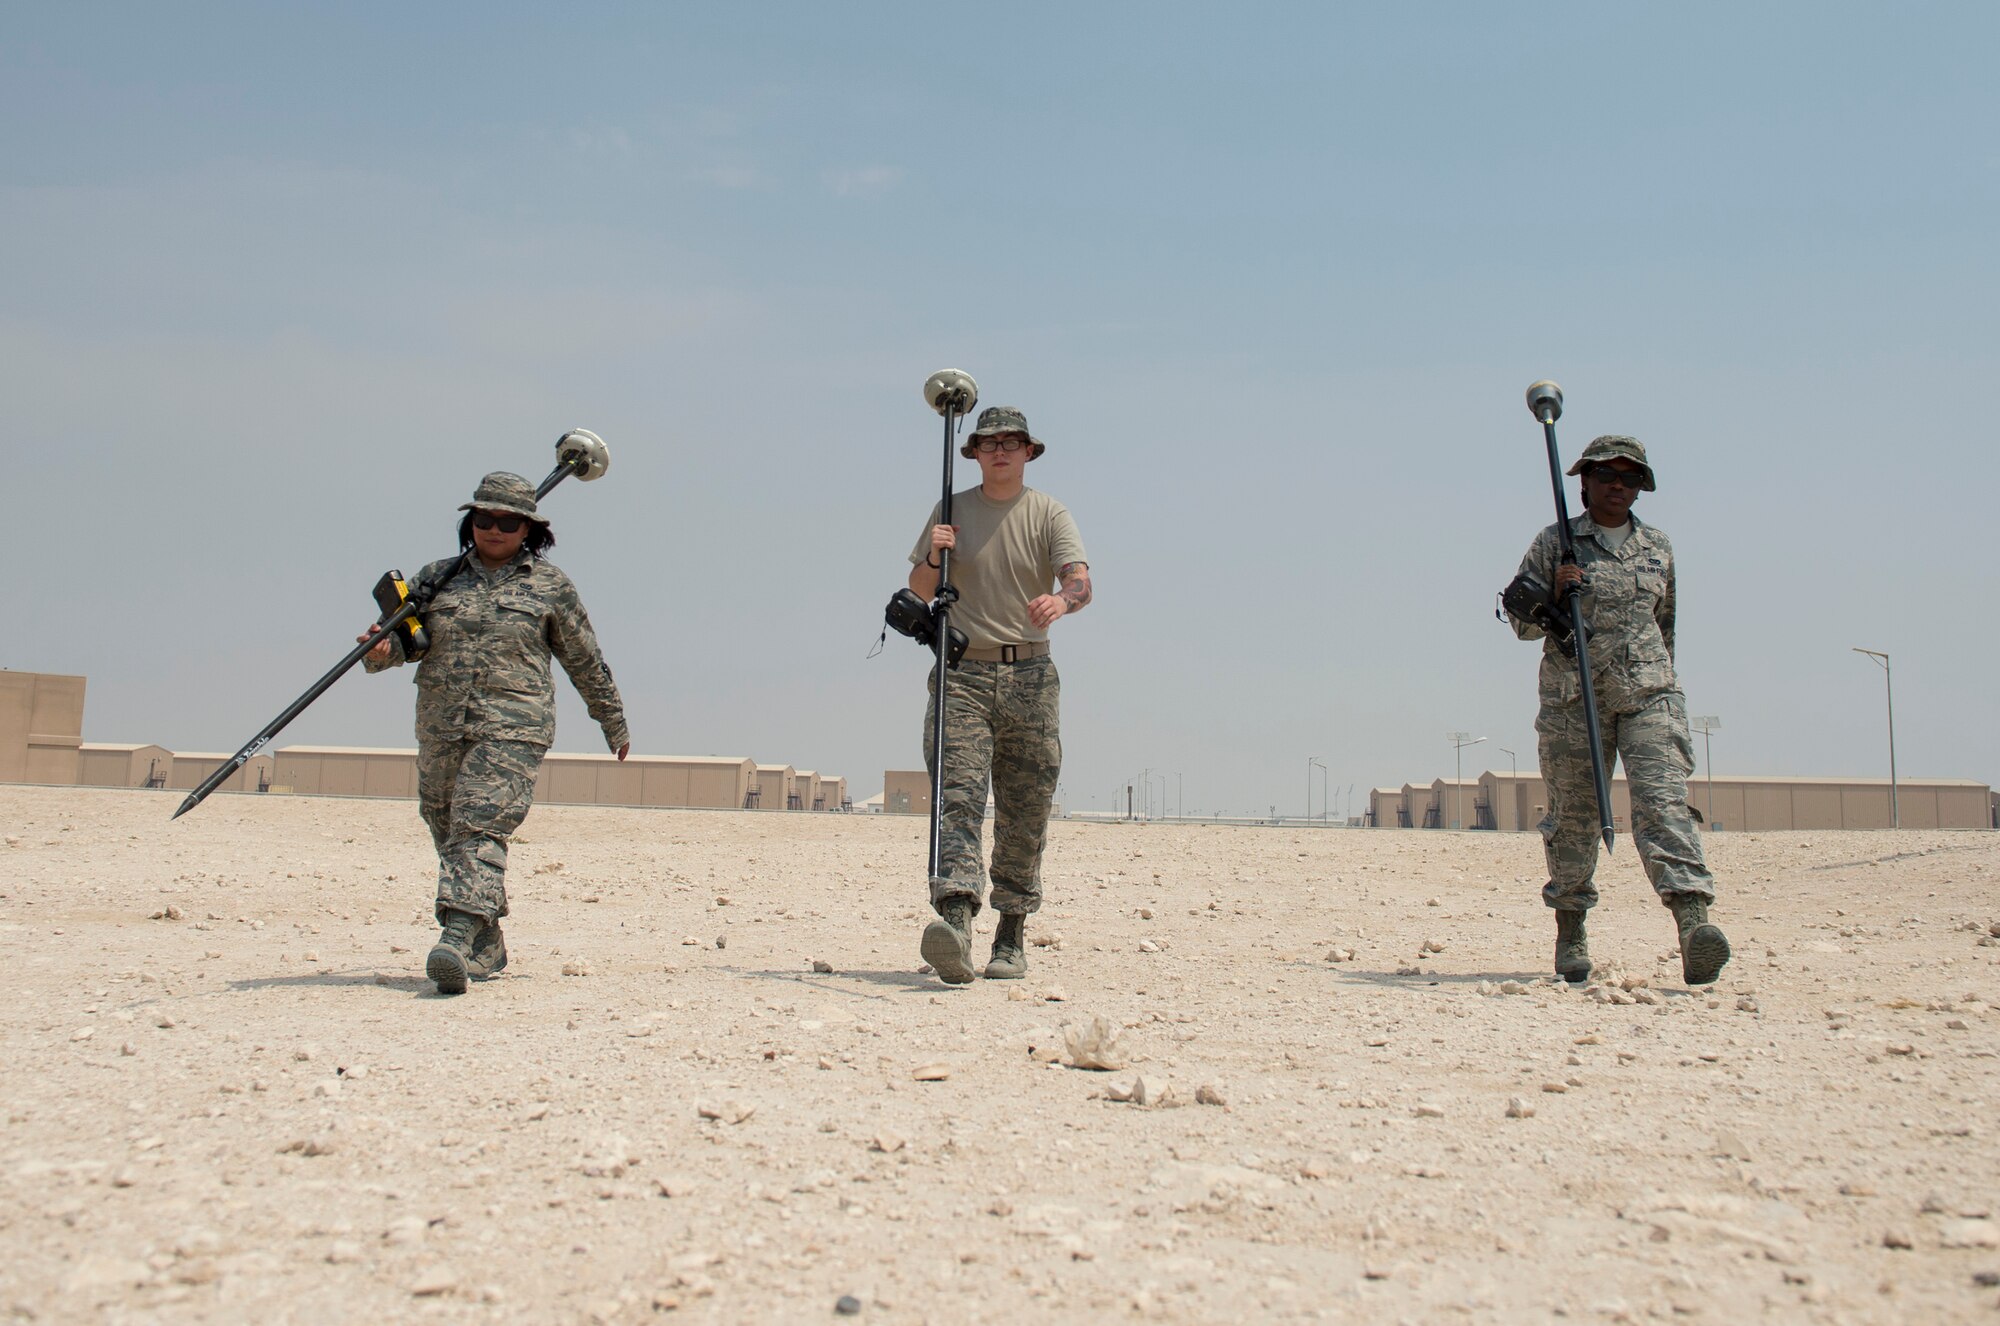 U.S Air Force Airmen from the GeoBase Shop with the 379th Expeditionary Civil Engineer Squadron, completed their surveys for new construction projects at Al Udeid Air Base, Qatar, Aug. 2, 2017.